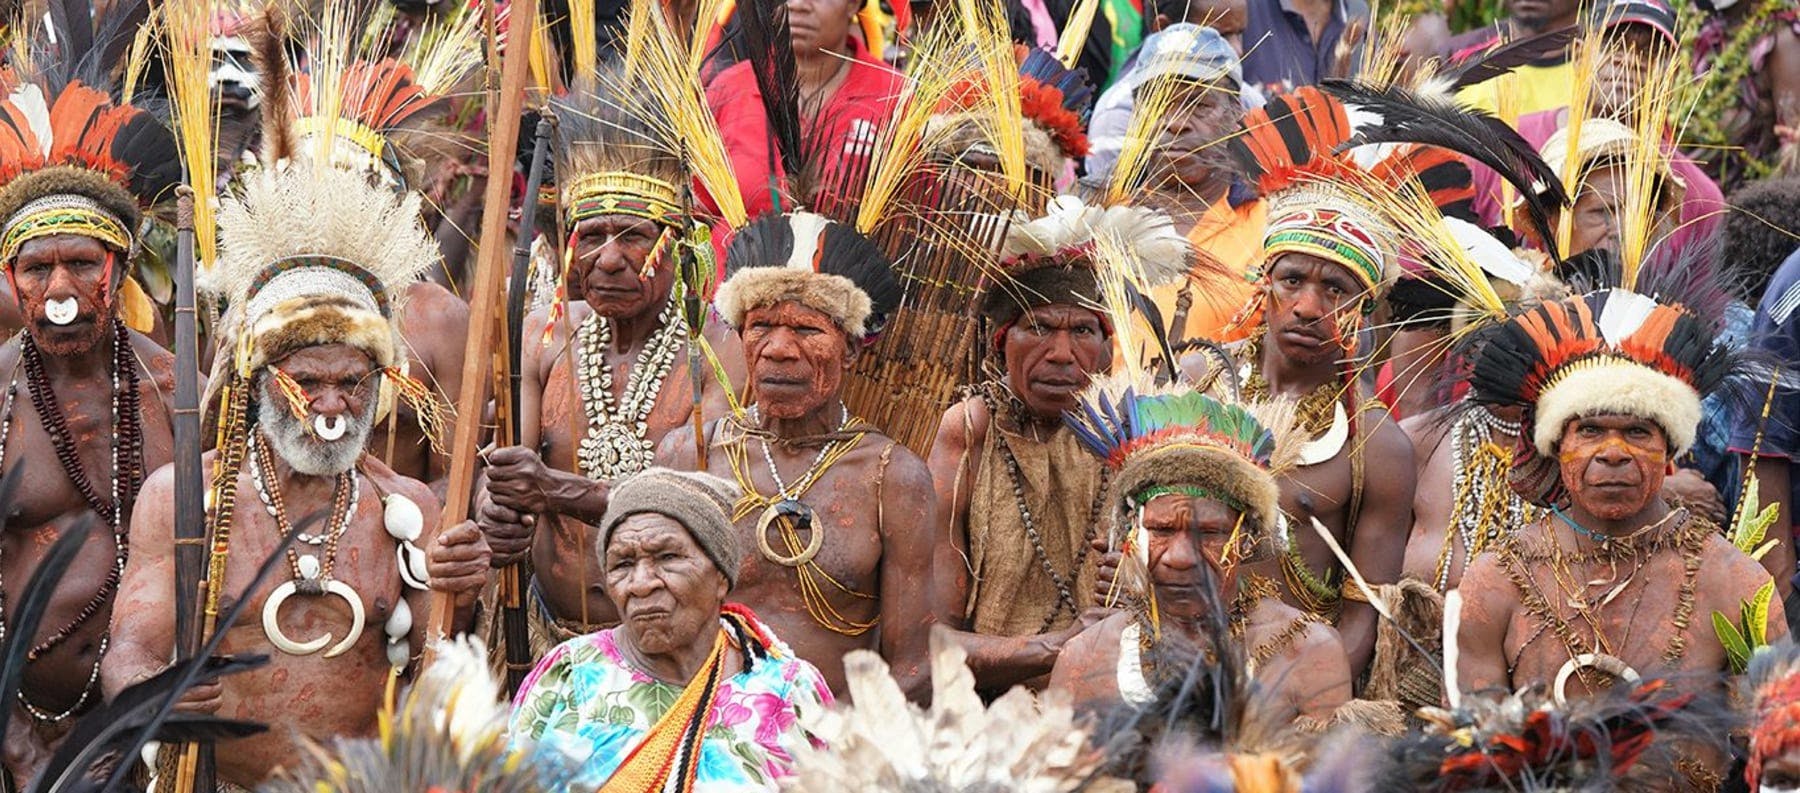 Local tribes in Papua New Guinea